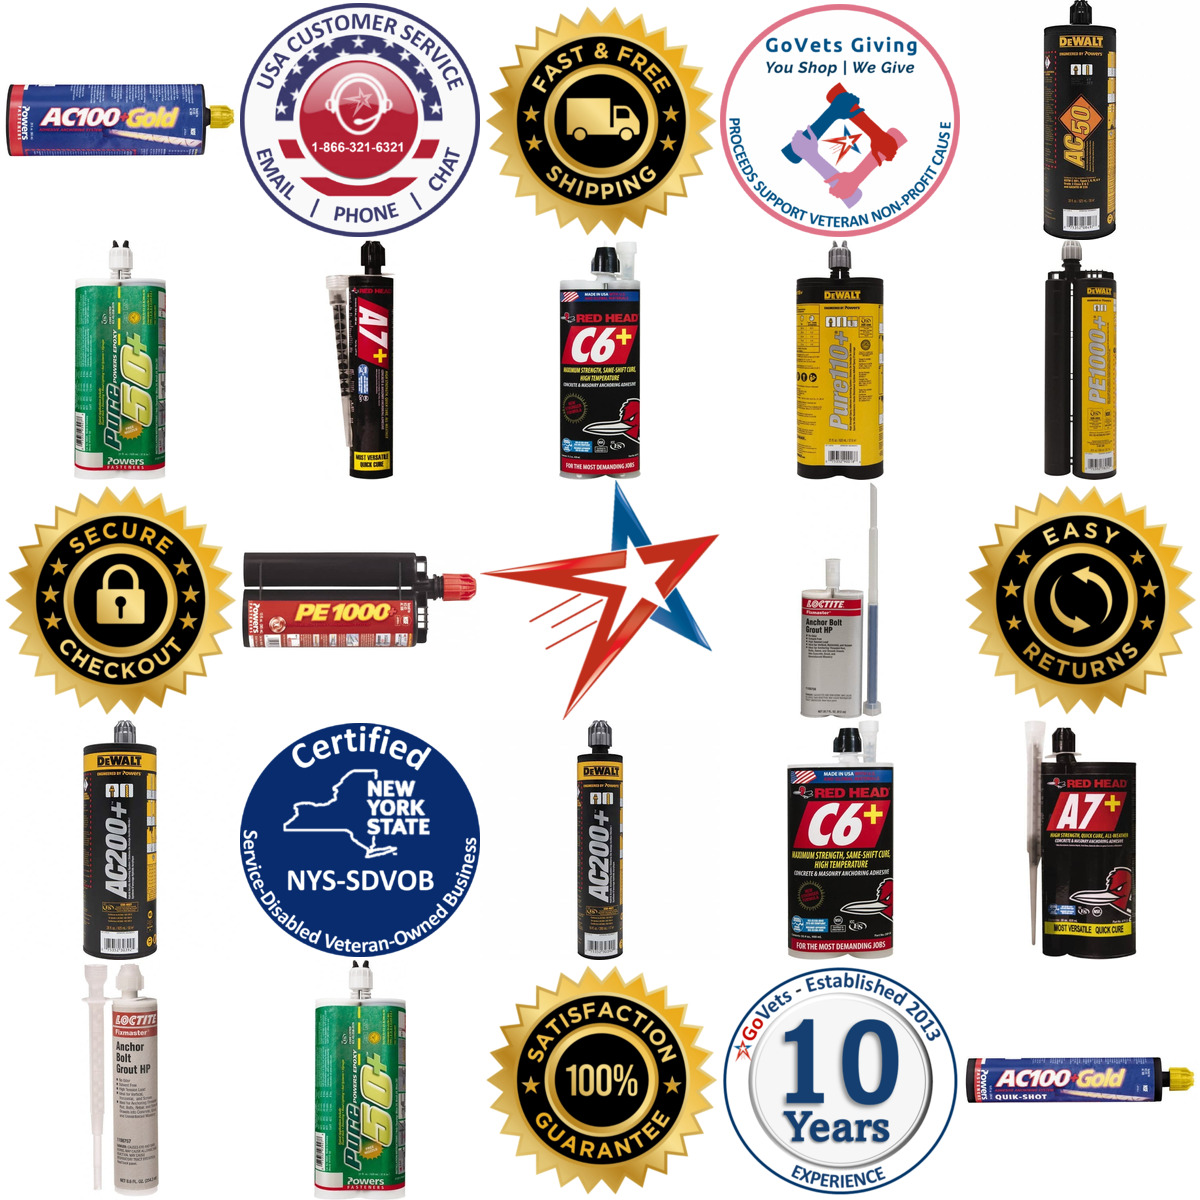 A selection of Anchoring Adhesives products on GoVets